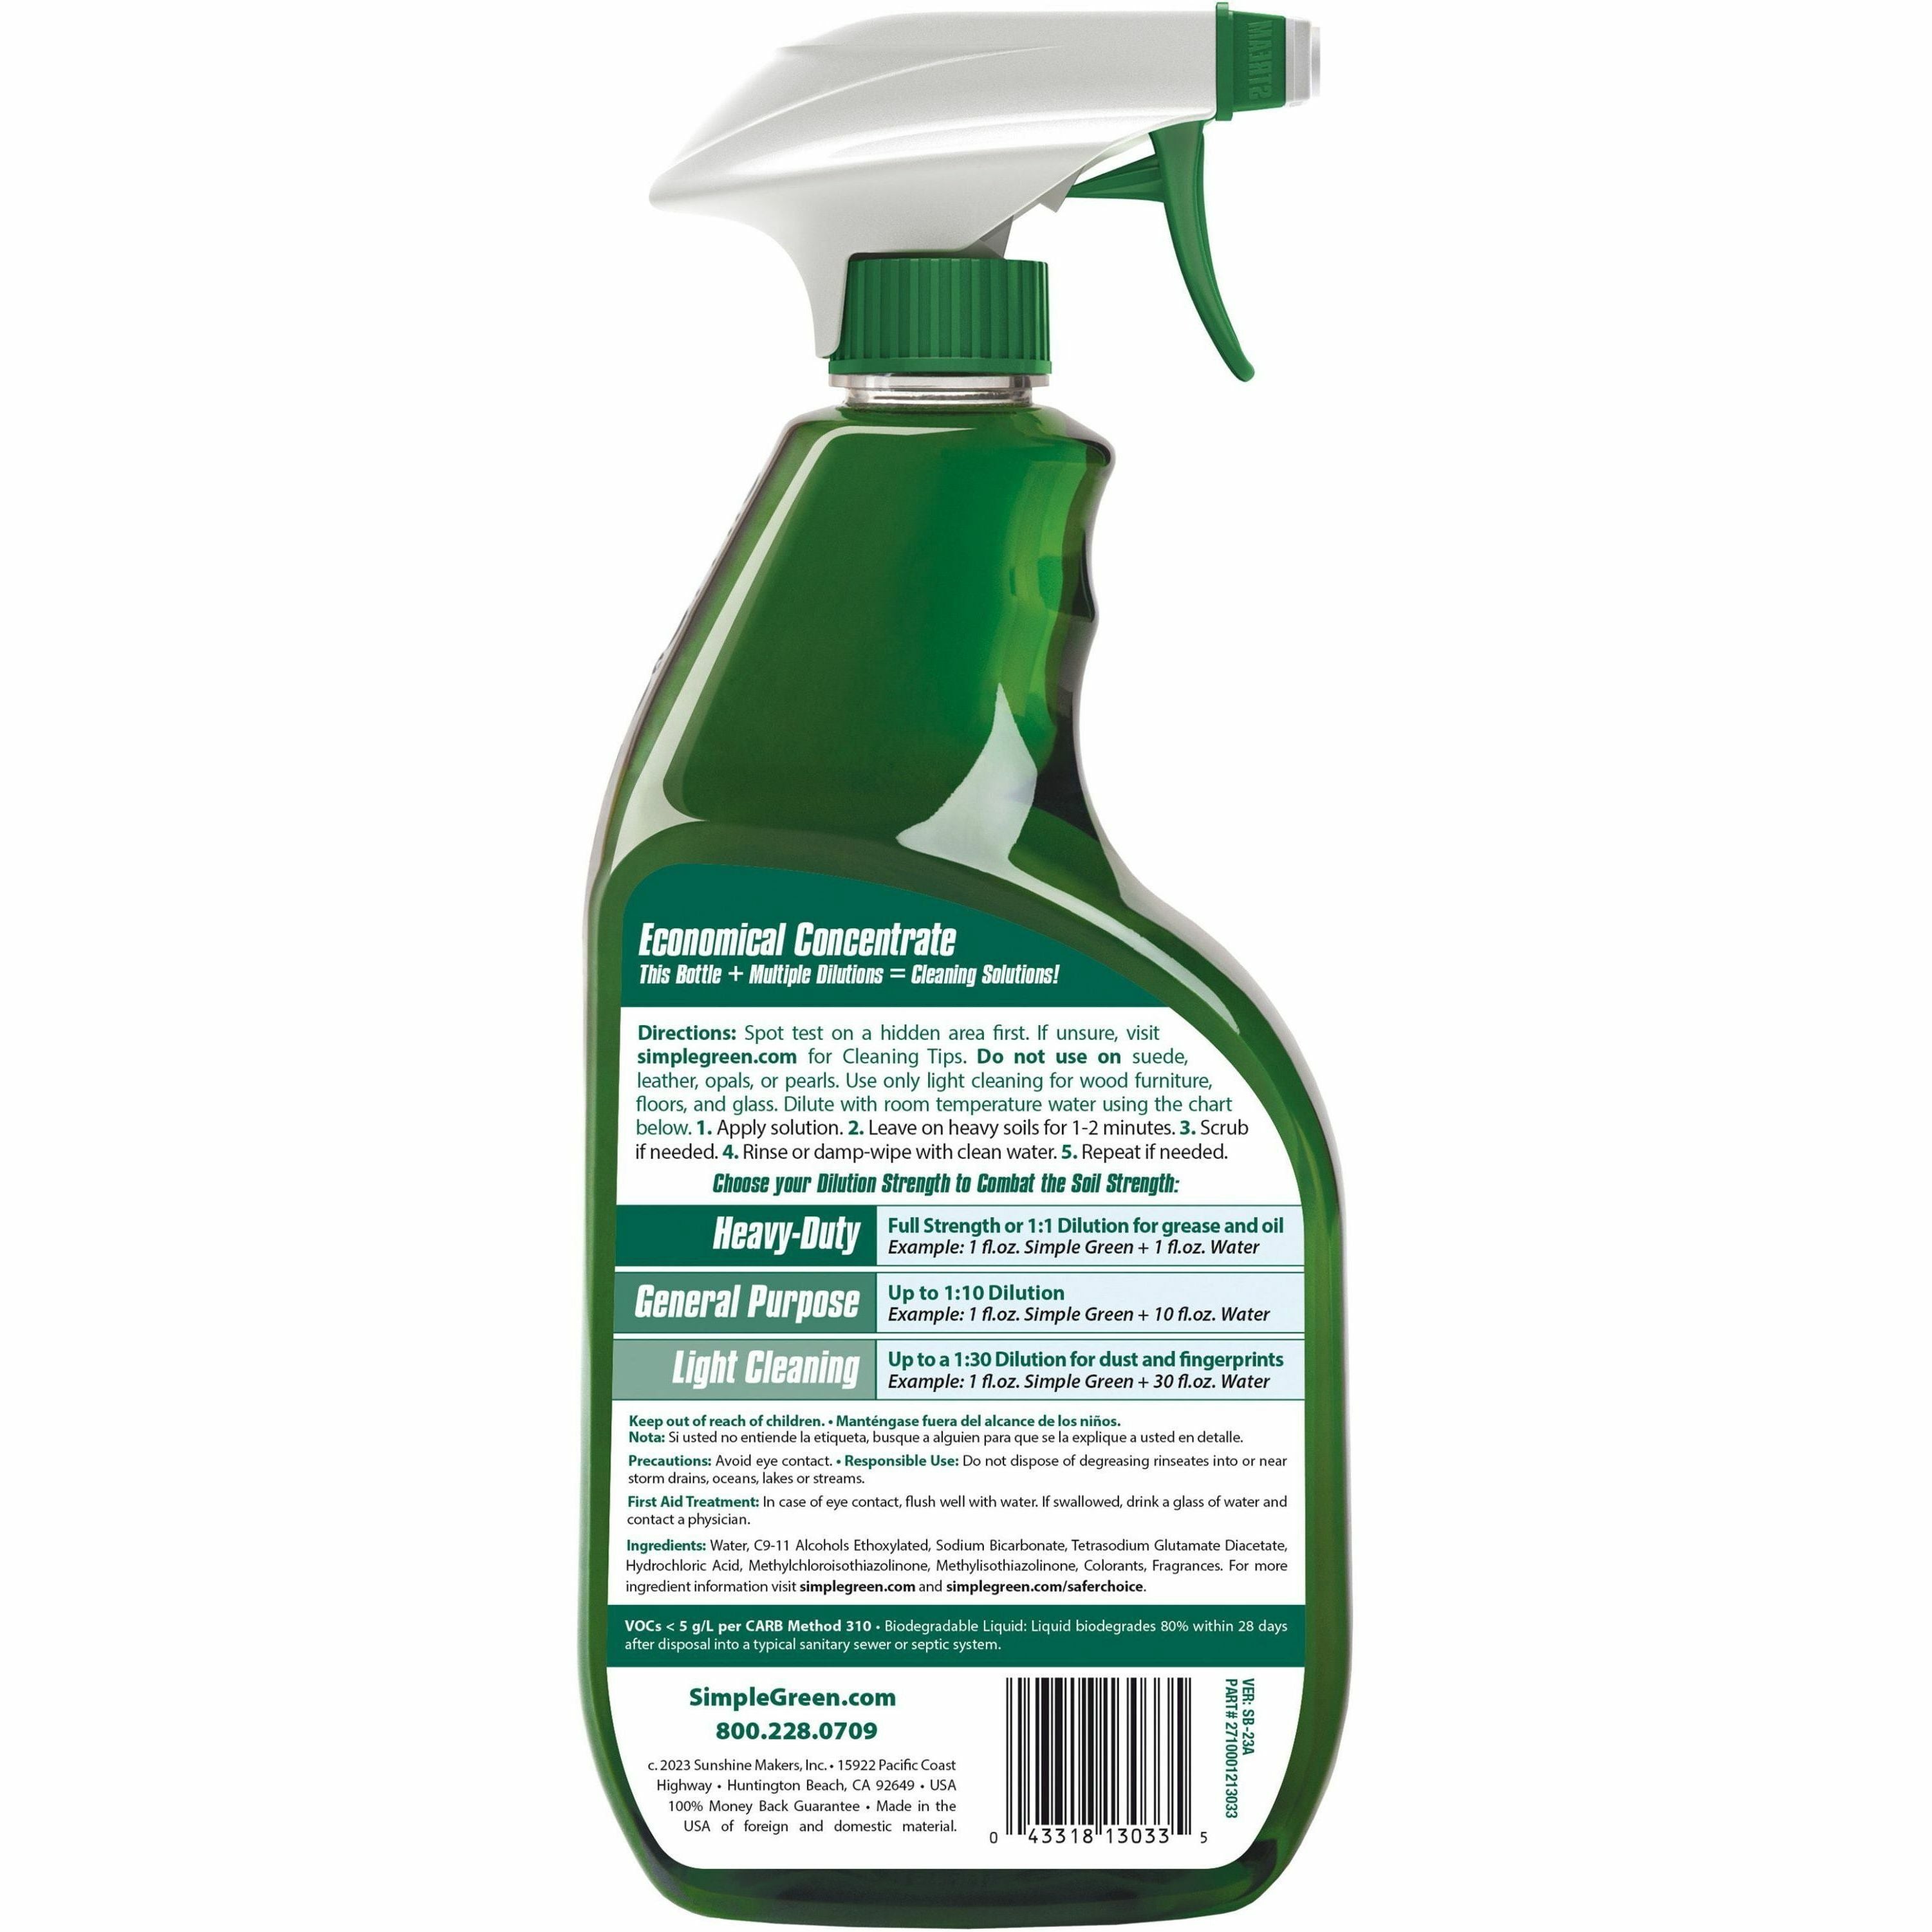 simple-green-all-purpose-concentrated-cleaner-concentrate-32-fl-oz-1-quart-1-each-non-toxic-streak-free-smudge-free-green_smp13033 - 2